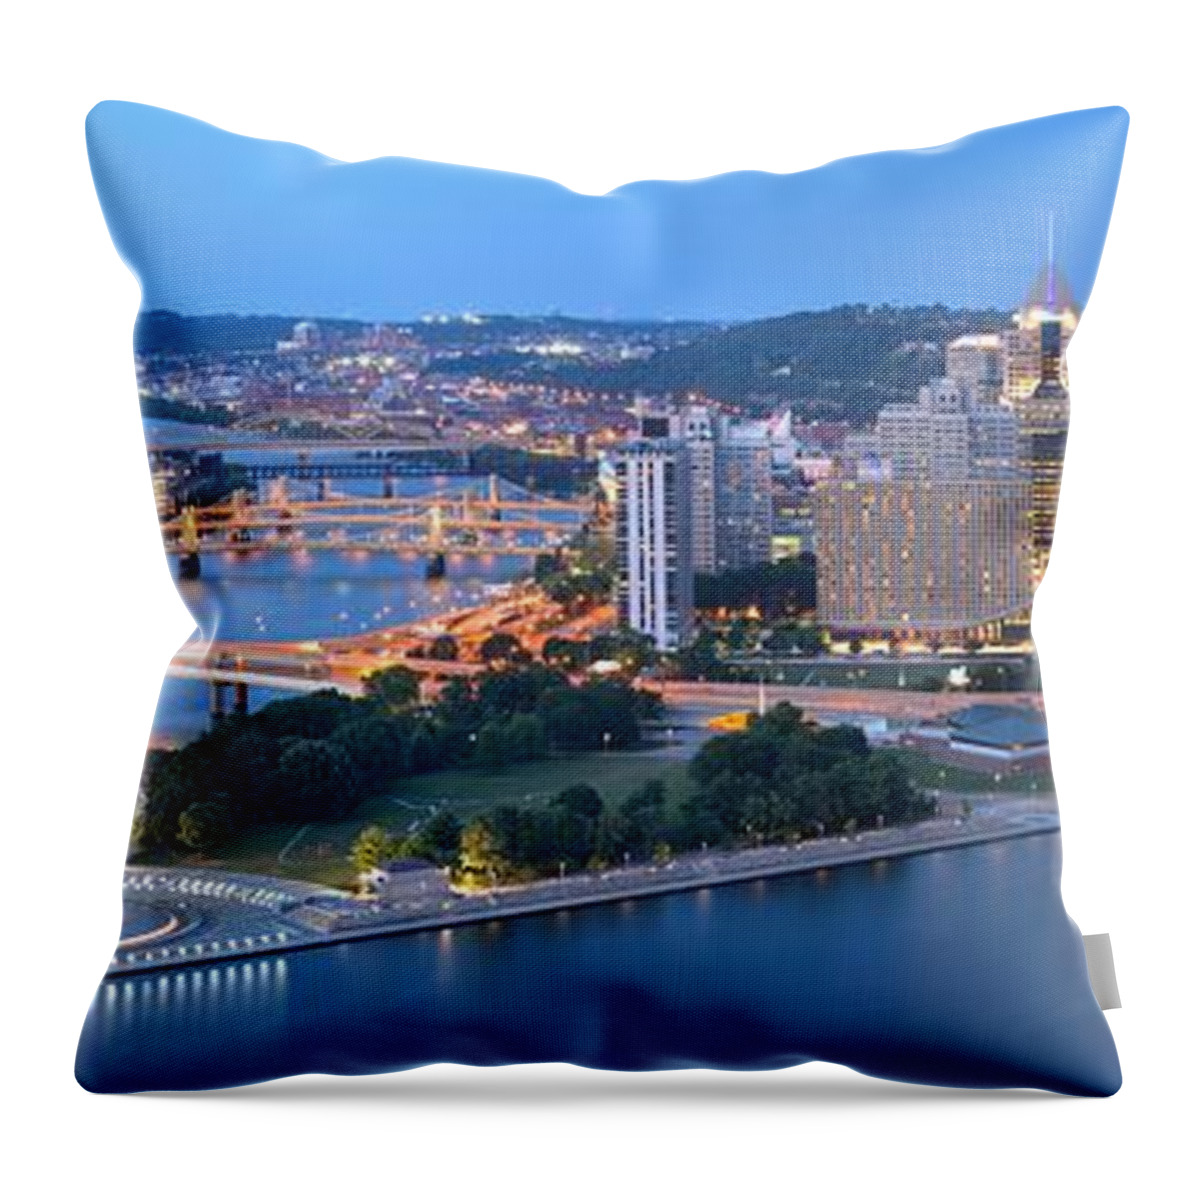 Pittsburgh Skyline Throw Pillow featuring the photograph Rivers Bridges And Skyscrapers In Pittsburgh by Adam Jewell